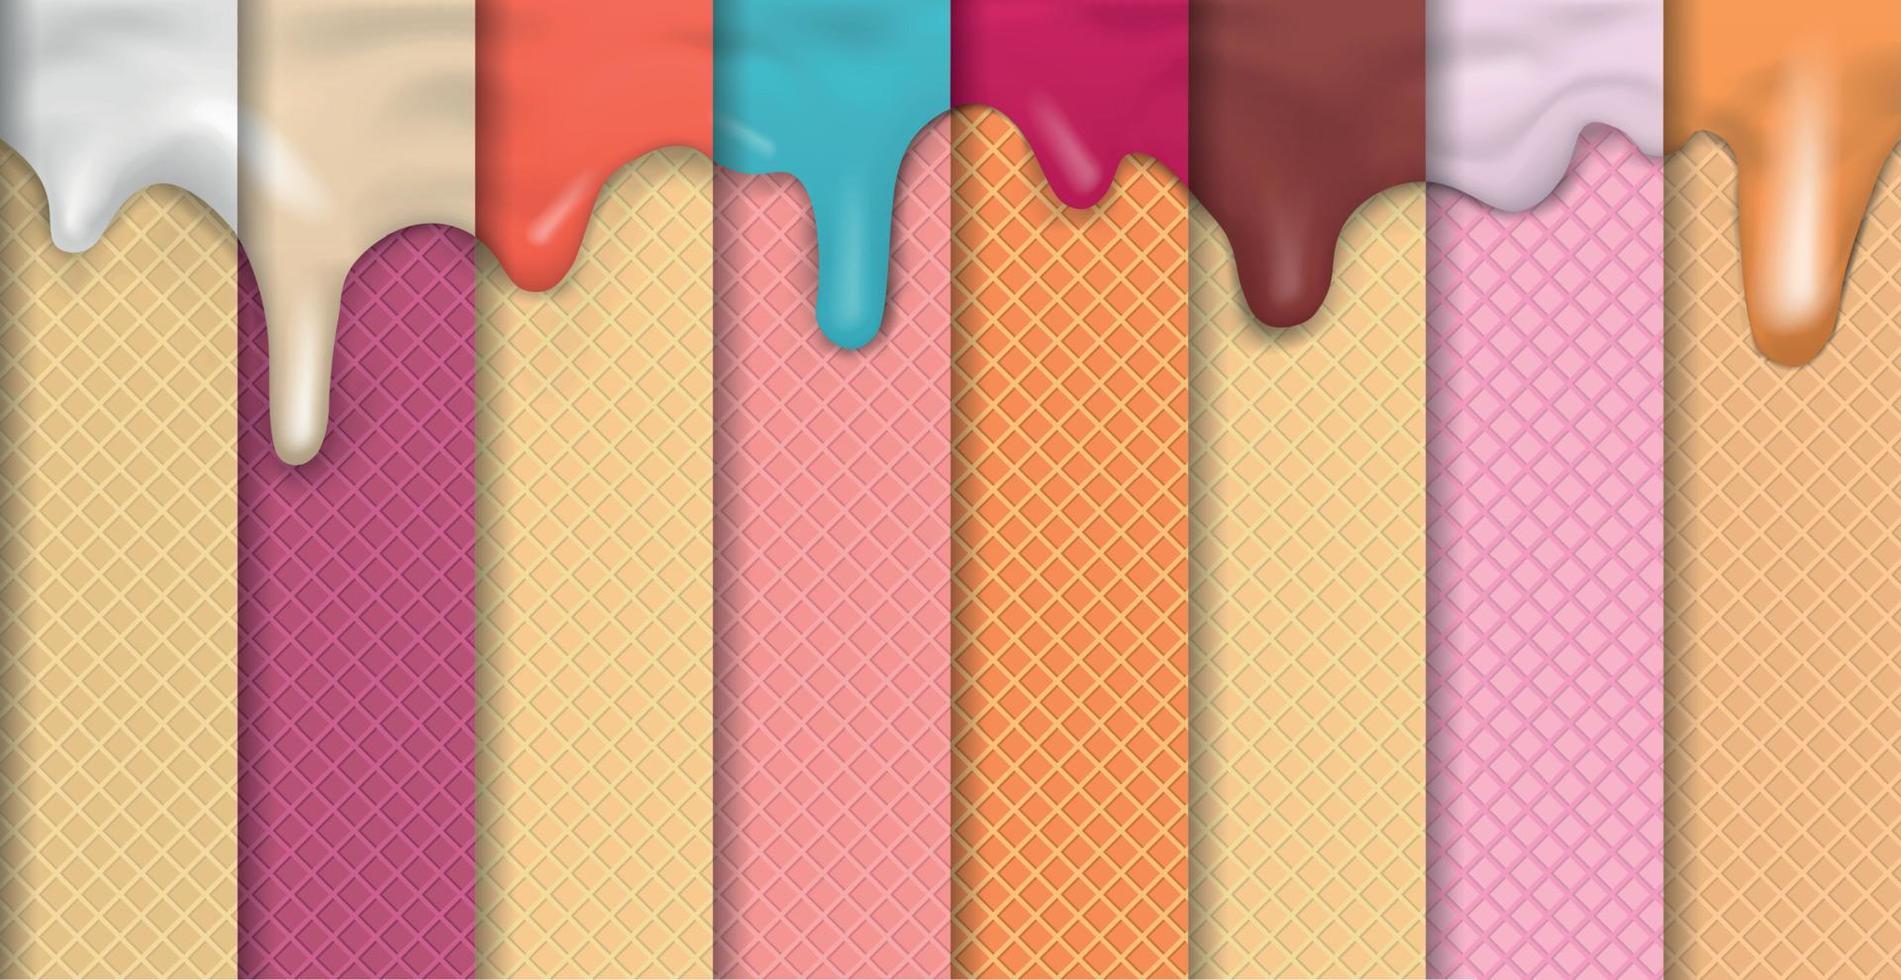 Set 8 pcs. texture background of ice cream of different flavors and colors - Vector